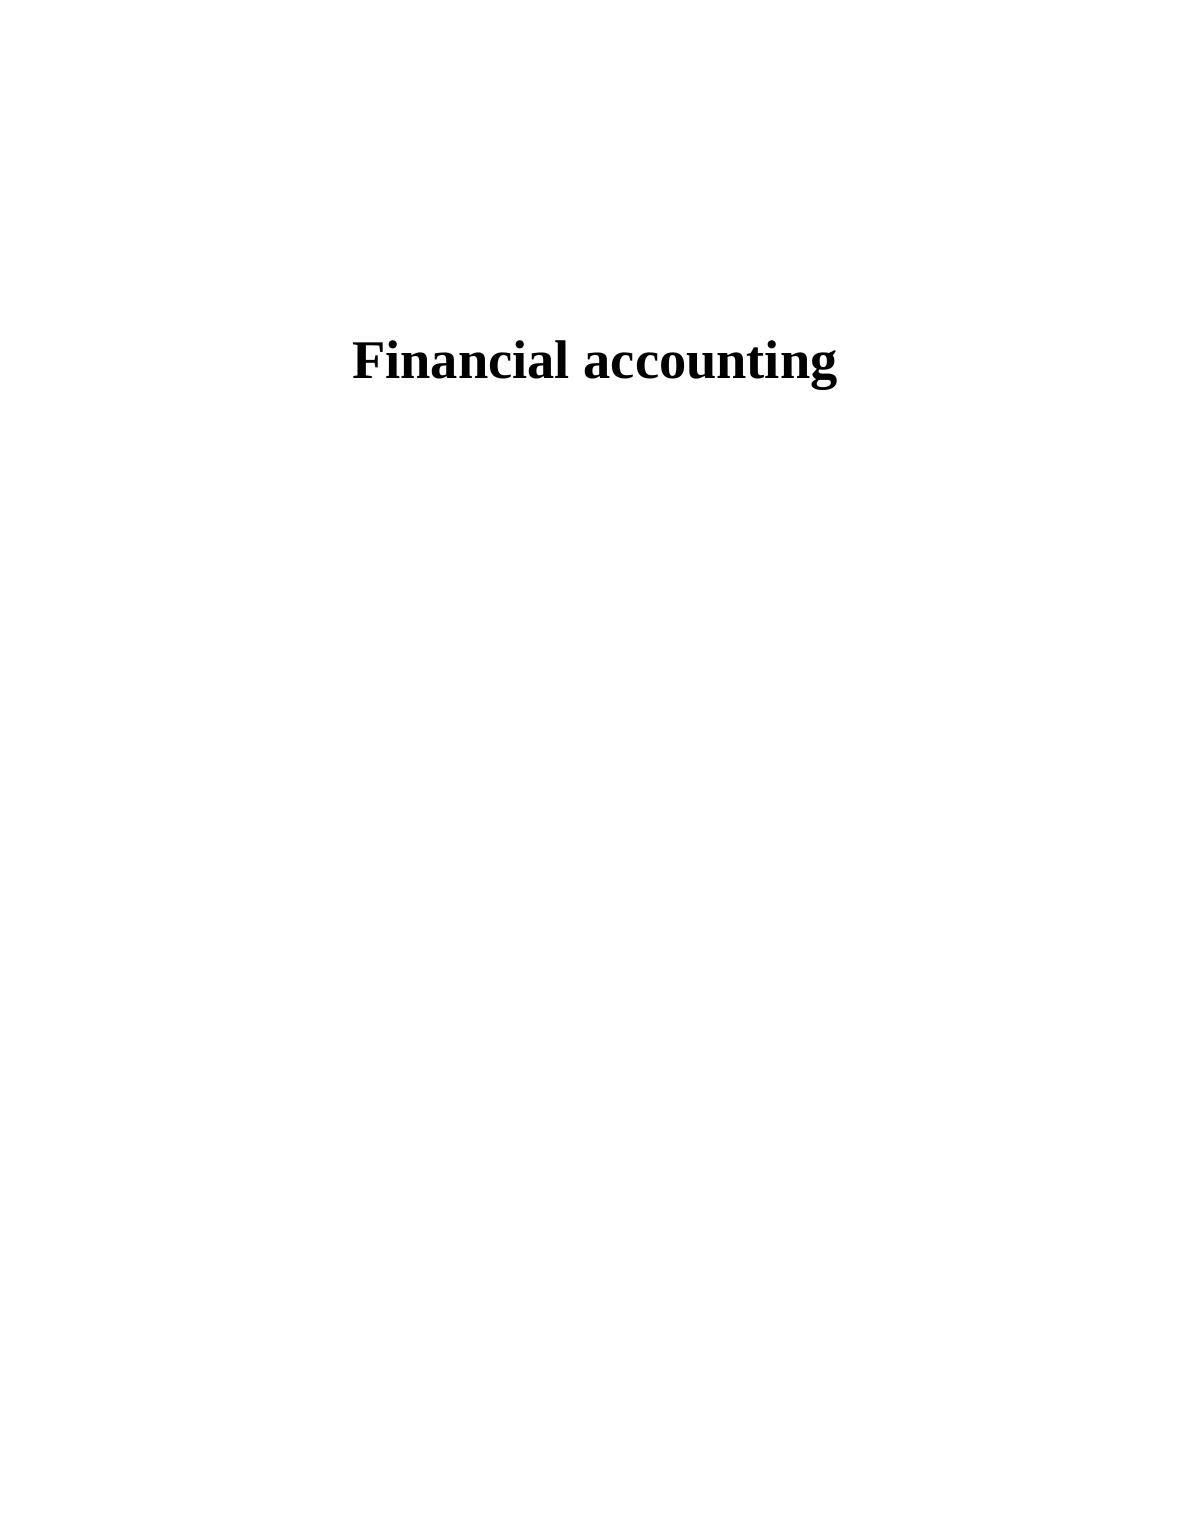 Financial Accounting and Its Purpose - Doc_1